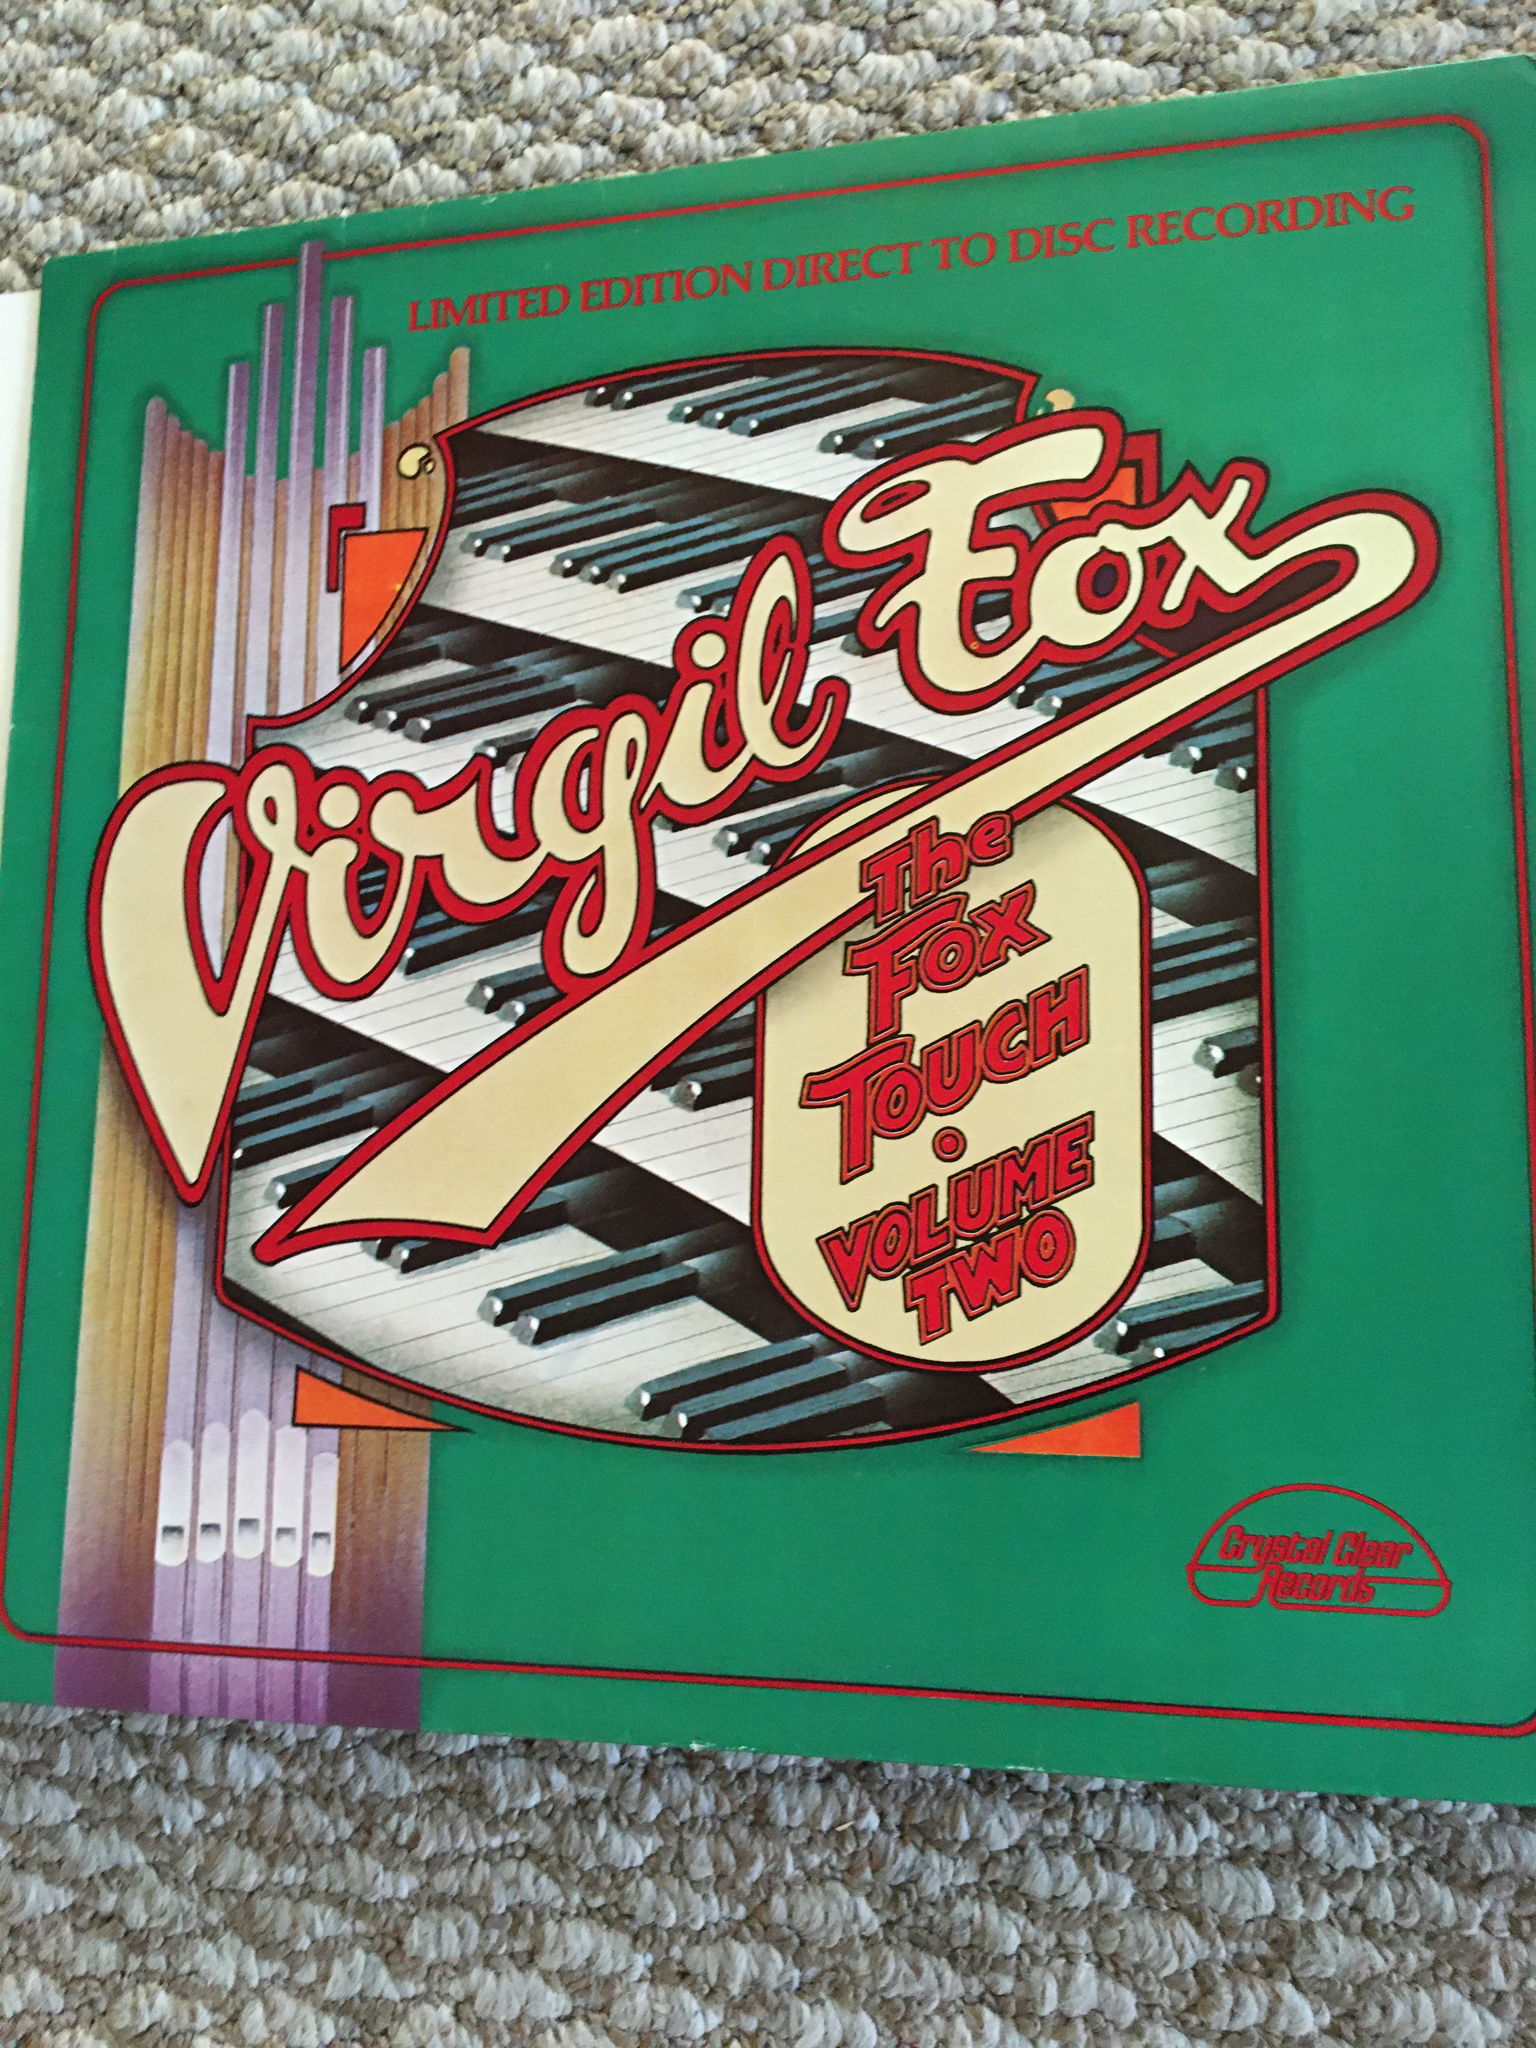 Virgil Fox the fox touch volume two Lp record  Direct t... 2